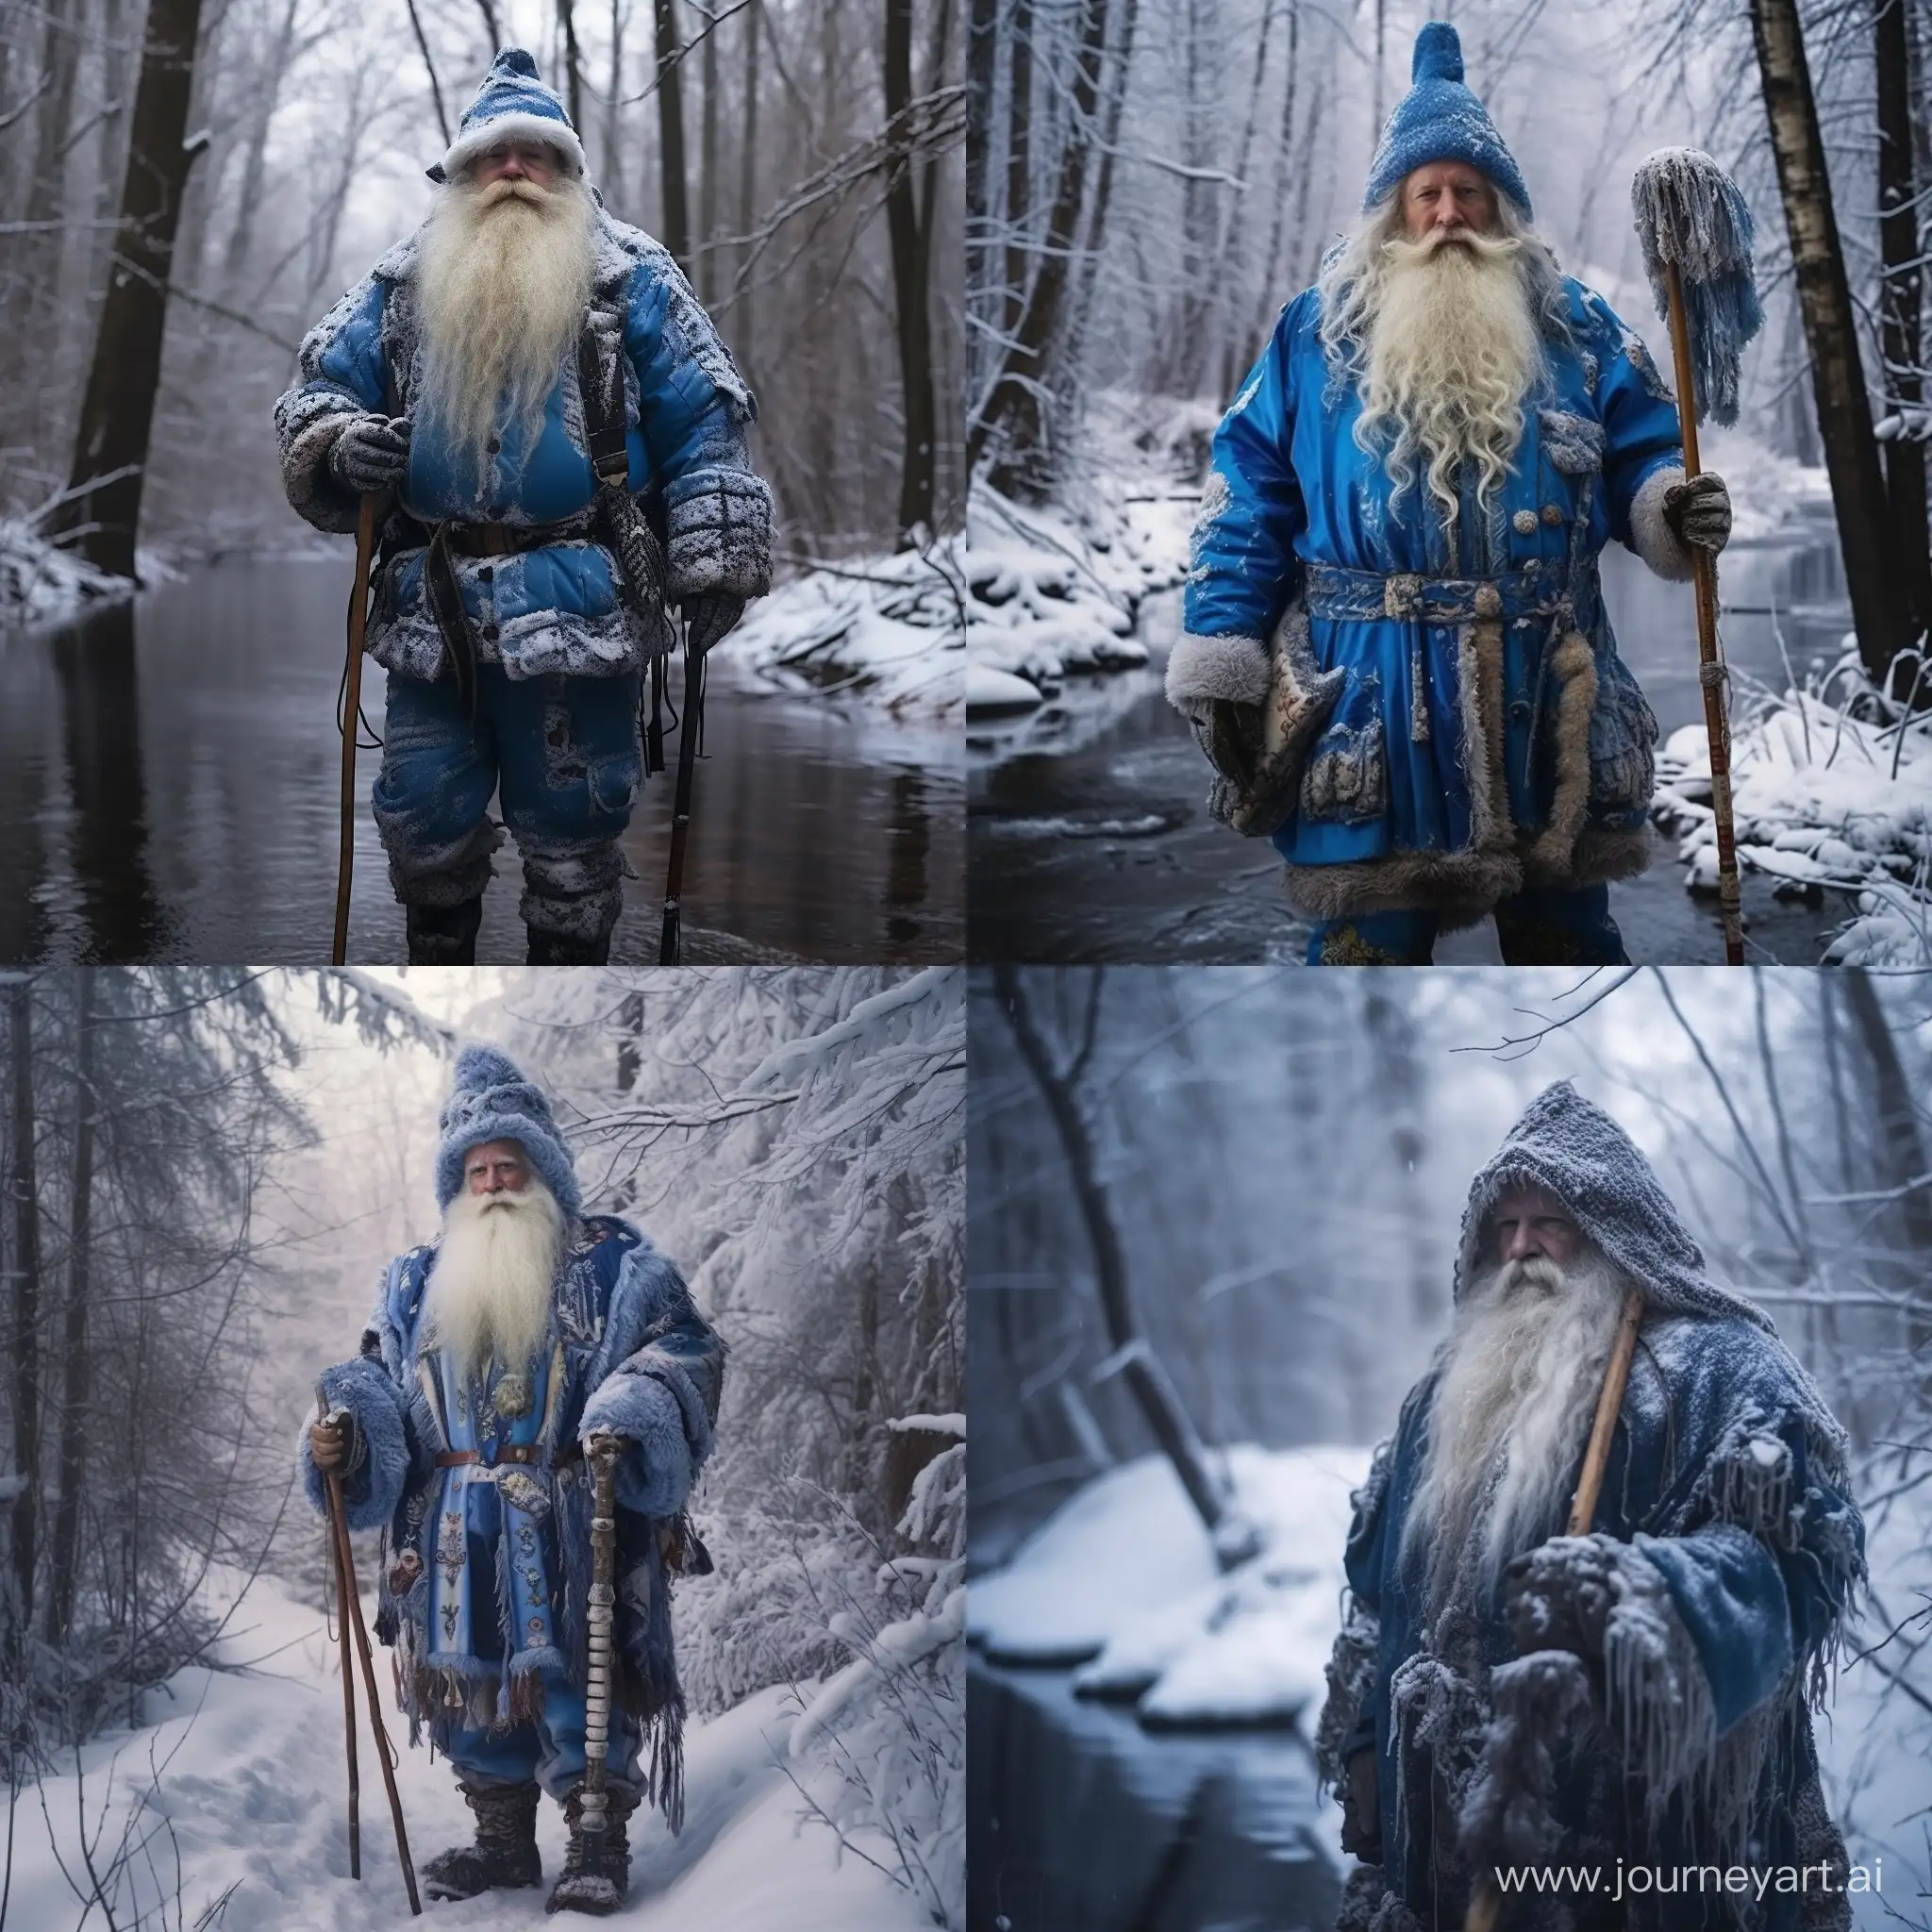 Russian Santa Claus with a blue fur coat and a blue hat, walks around his forest possessions, freezing rivers with his magic staff and covering trees with snow, photography, hyperrealism